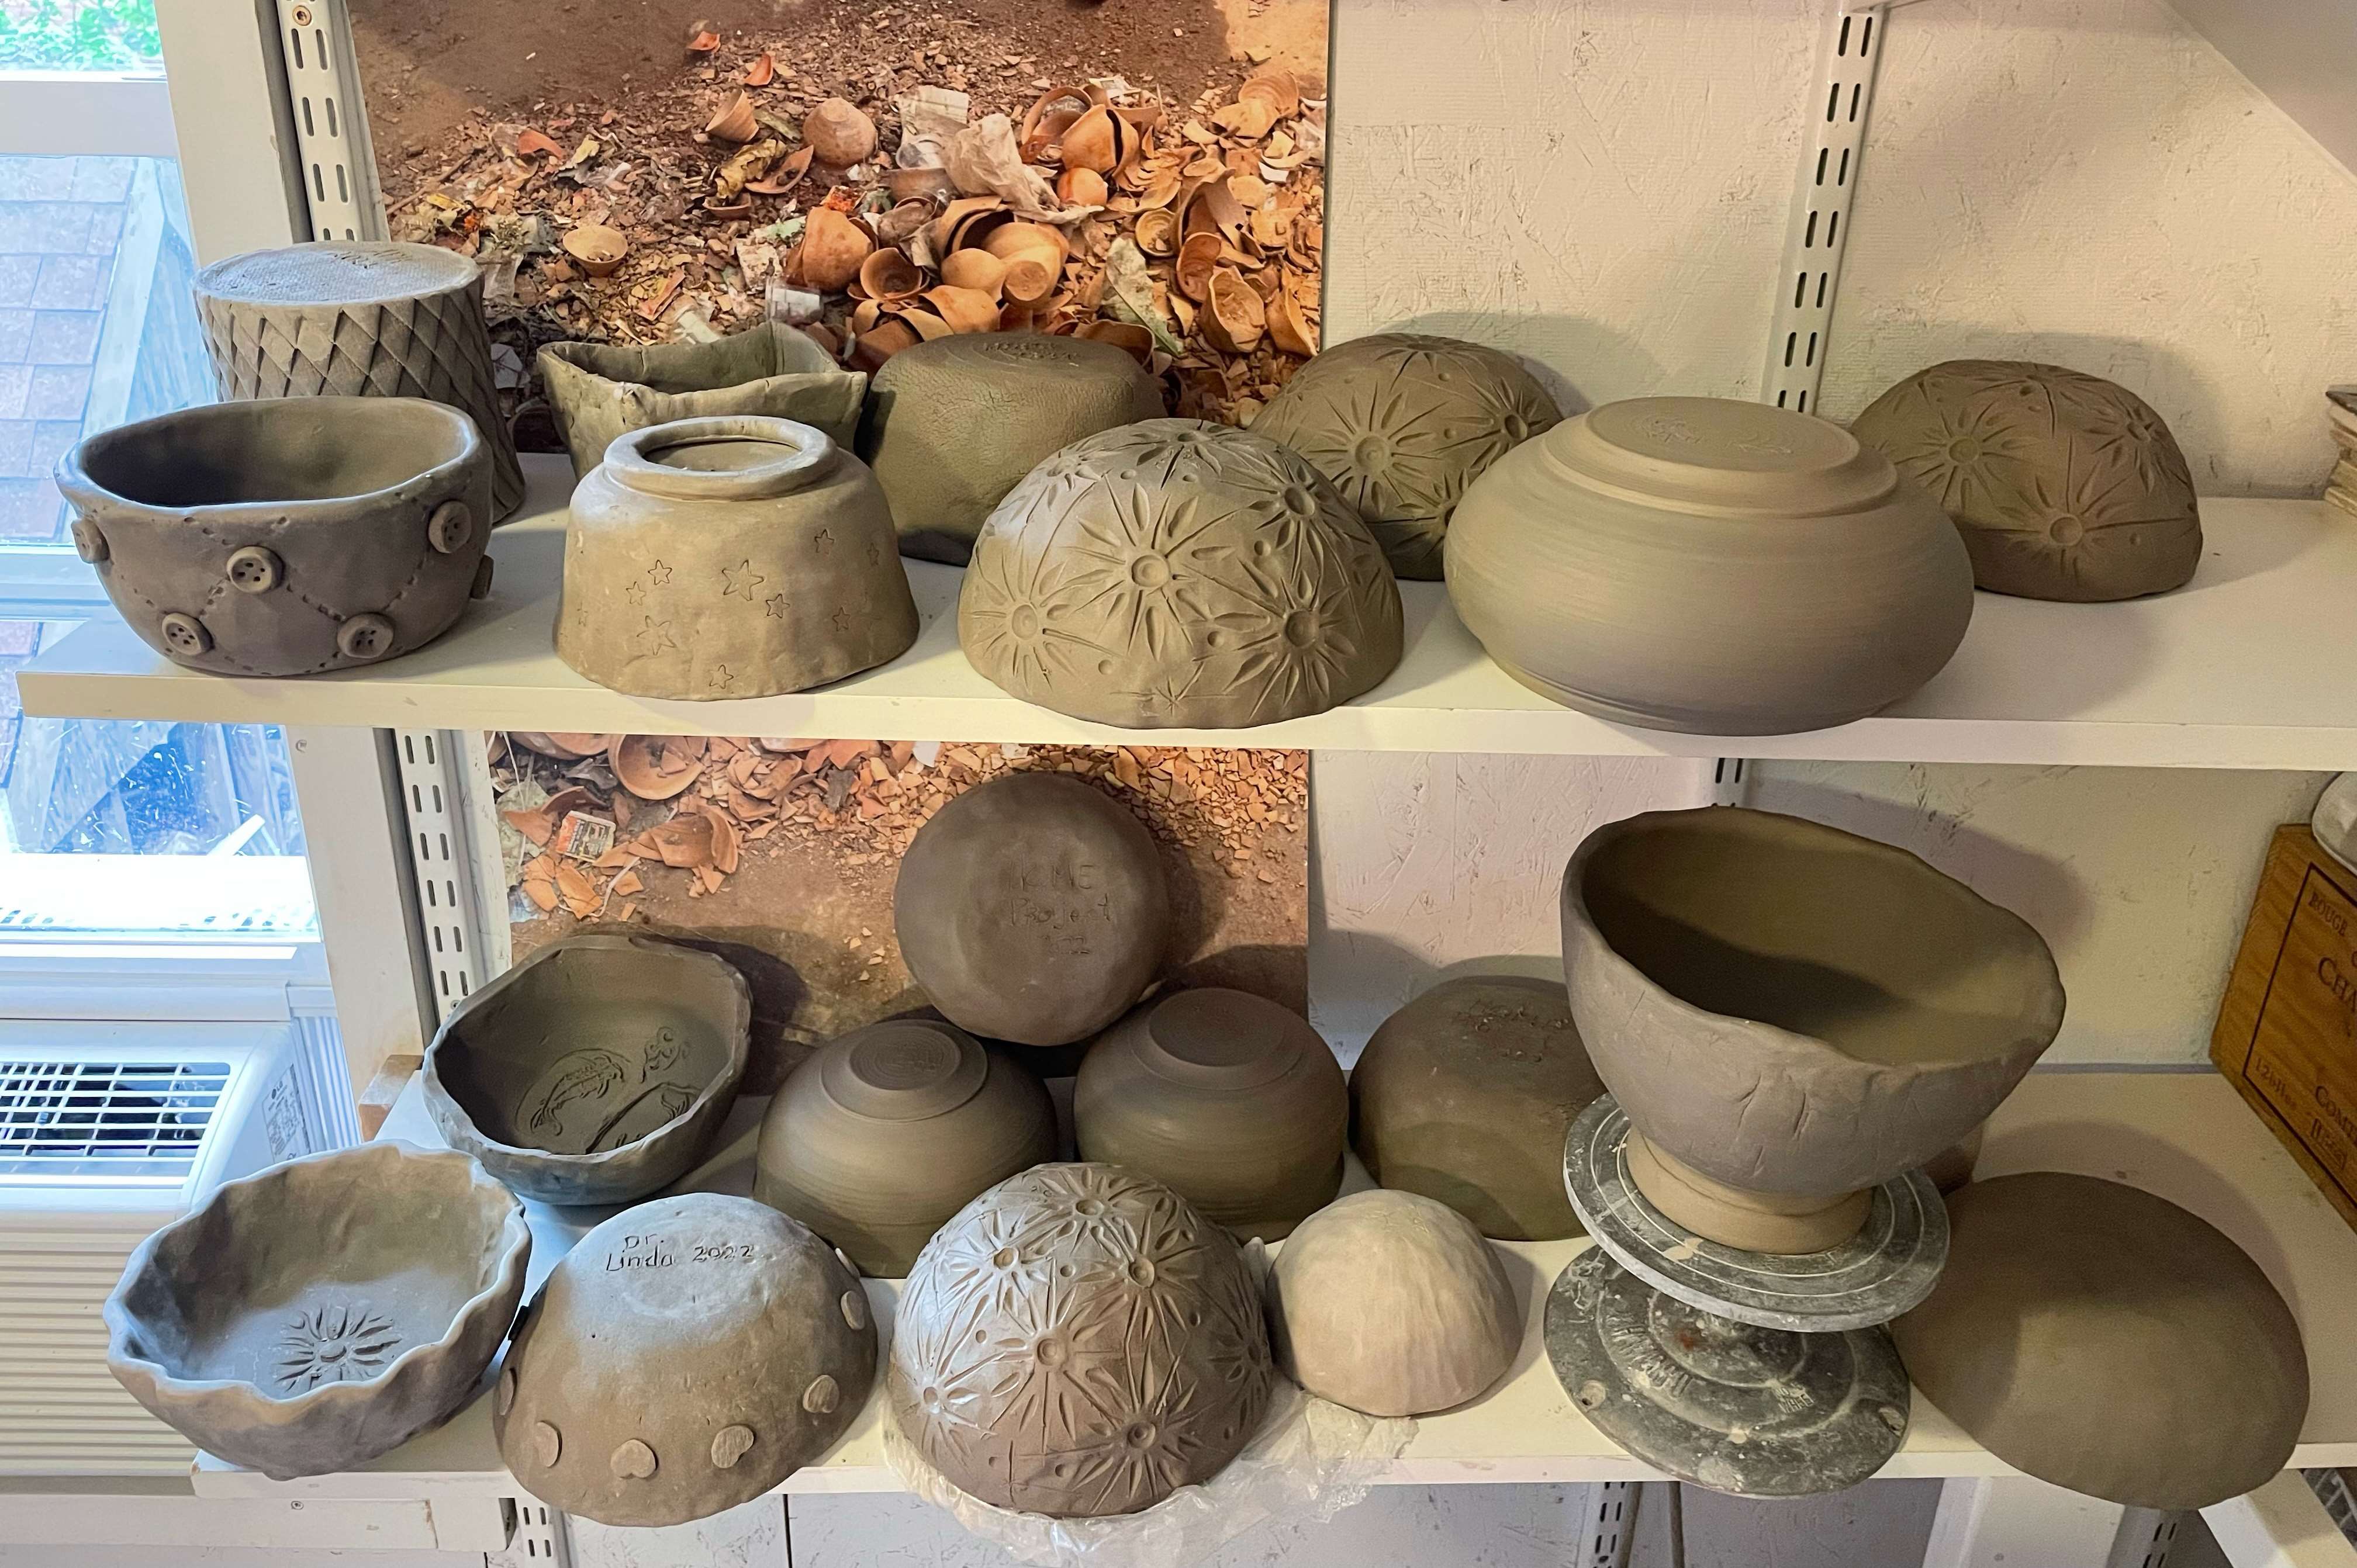 A variety of bowls being prepared for the Empty Bowls 2022 event